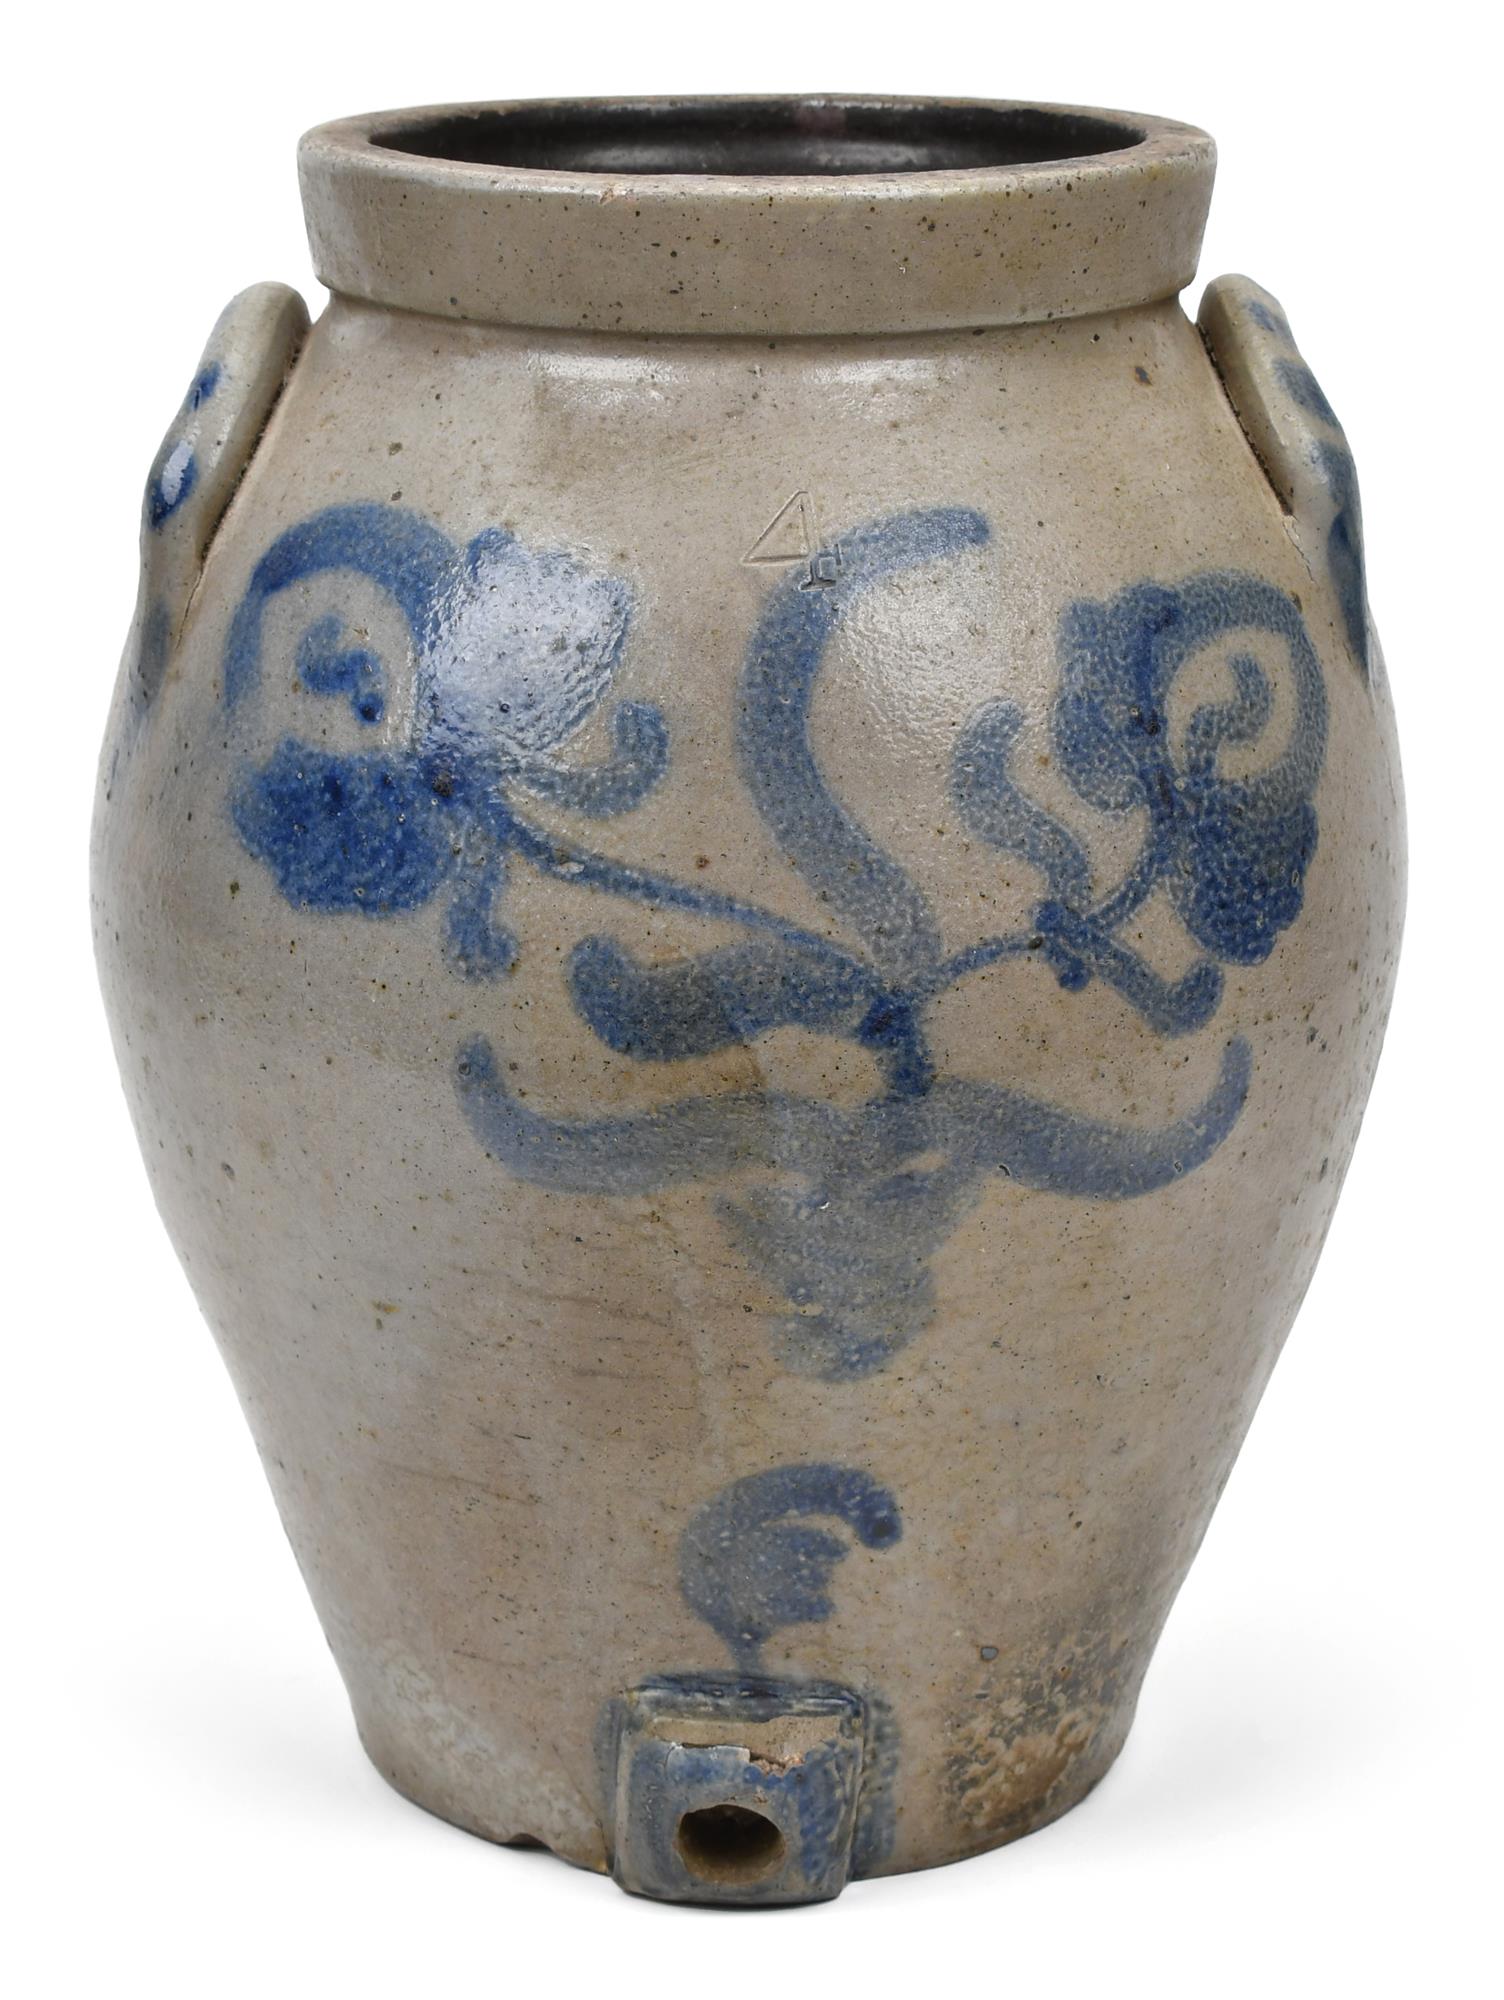 19TH C. DECORATED STONEWARE WATER